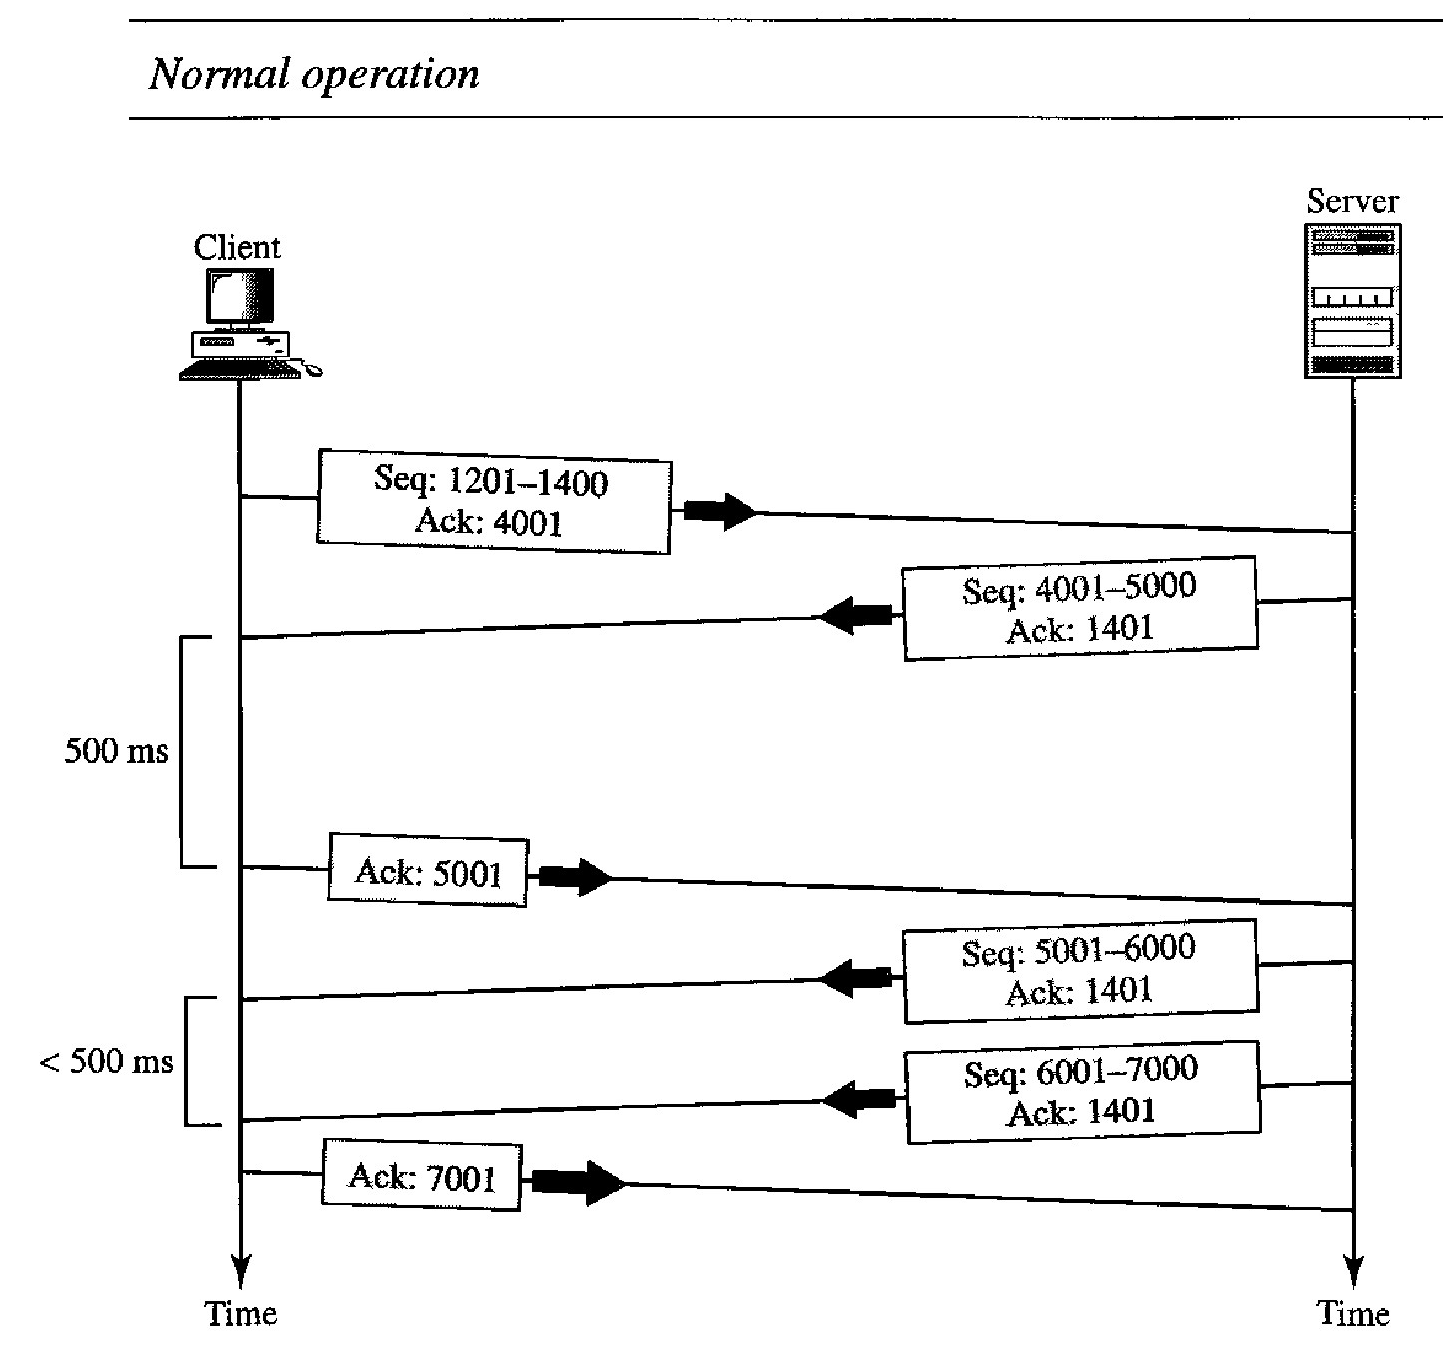 Scenarios during TCP transmission - Normal Operation